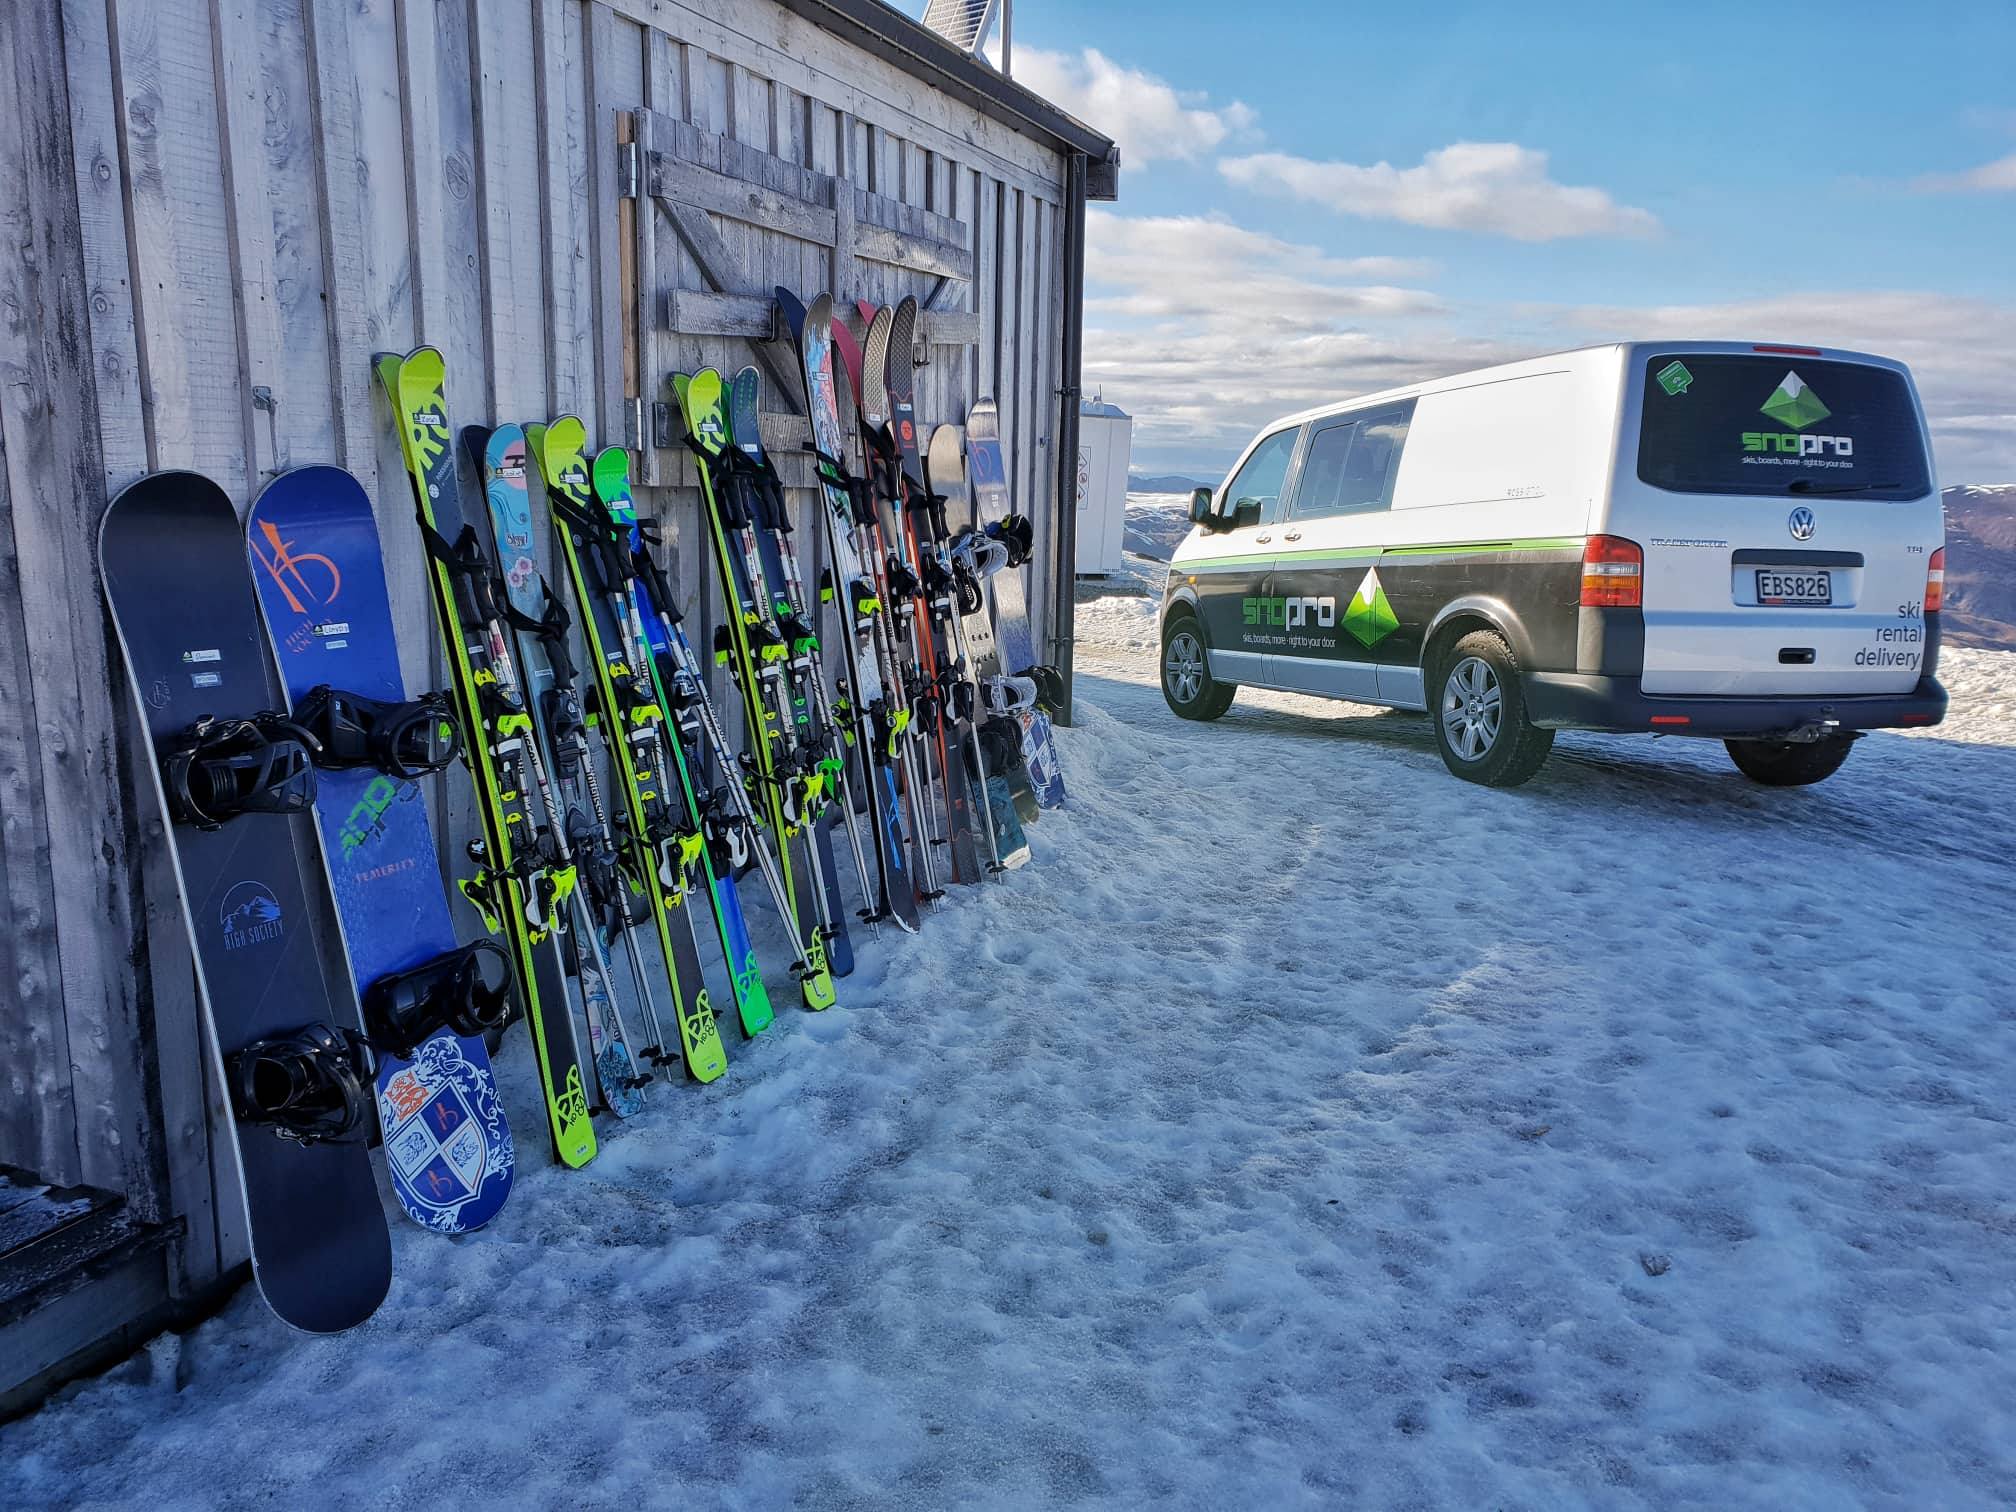 Large groups and corporate ski rental delivery